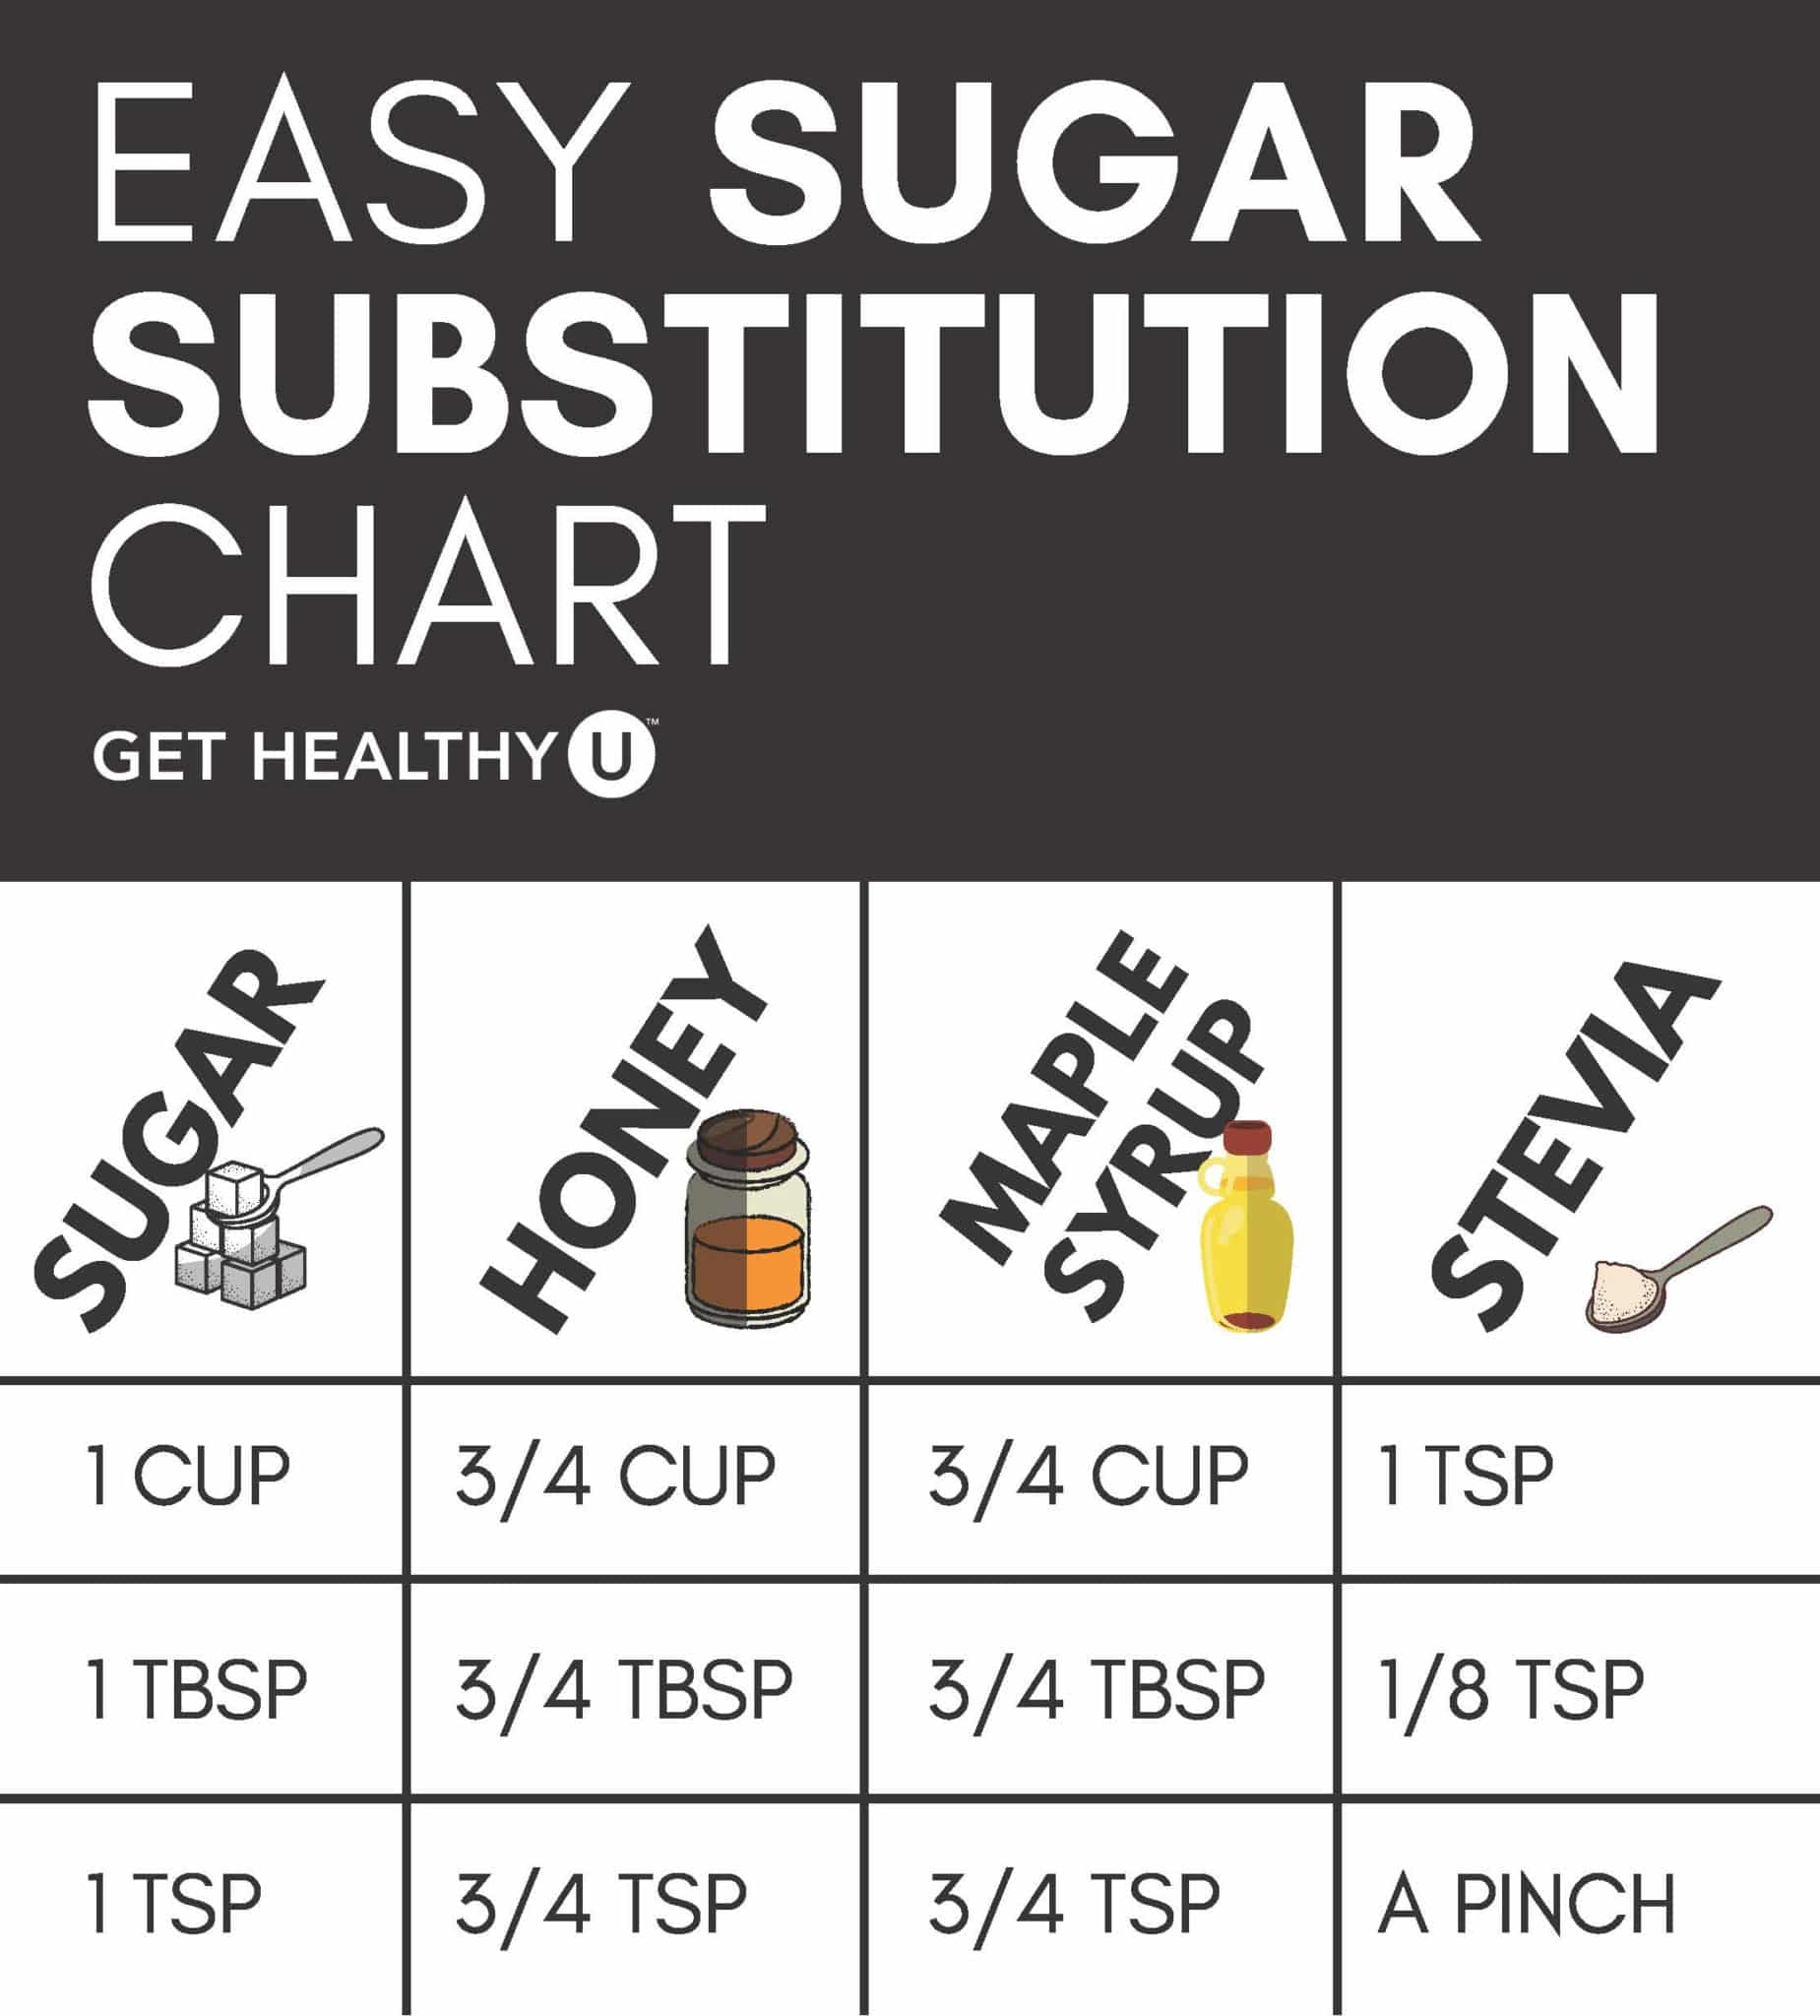 Thanks for signing up for the Easy Sugar Substitution Chart!